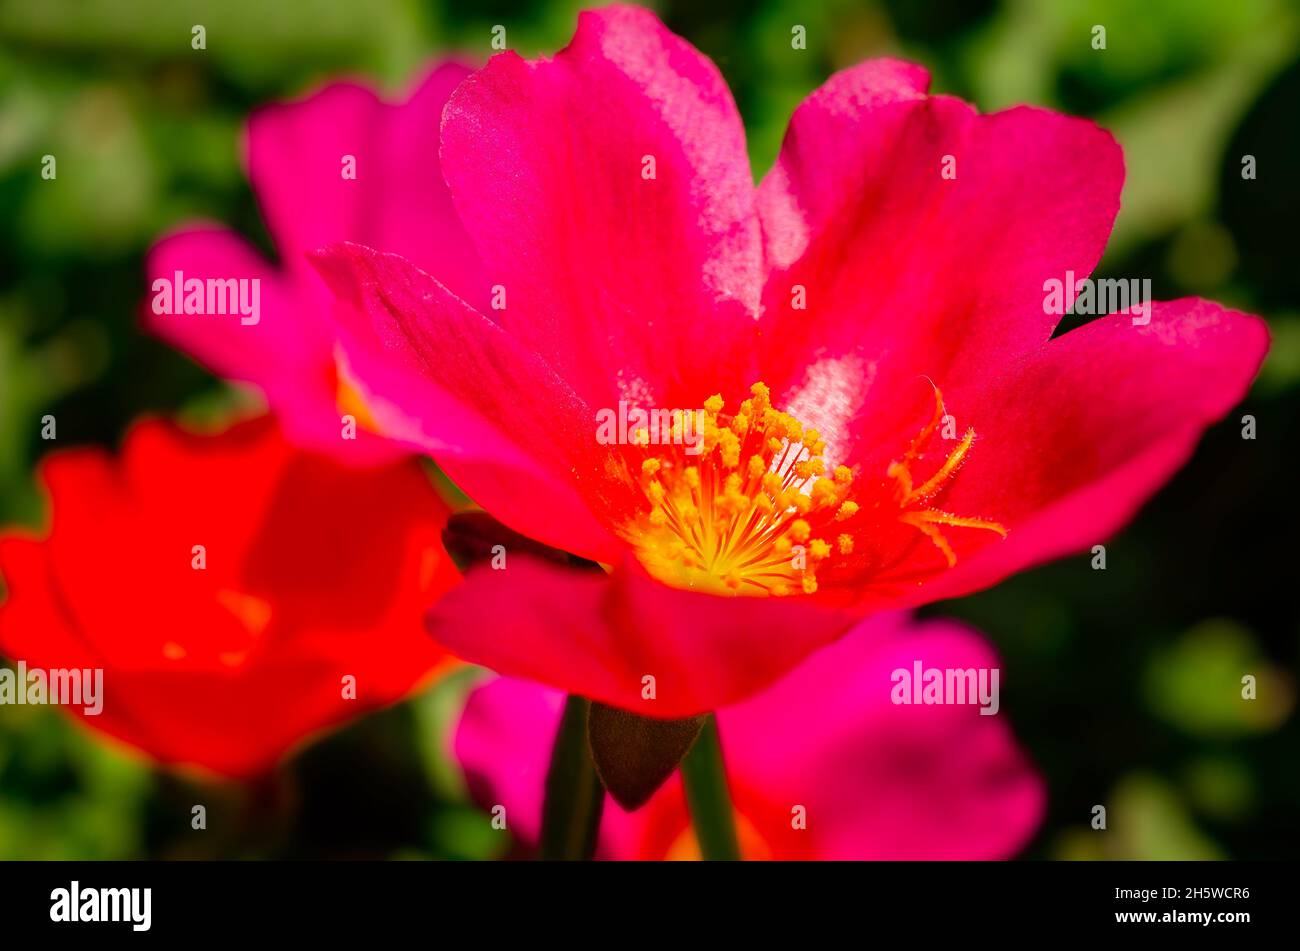 Purslane (Portulaca umbraticola) blooms in a container, May 15, 2016, in Coden, Alabama. The purslane is a perennial succulent. Stock Photo